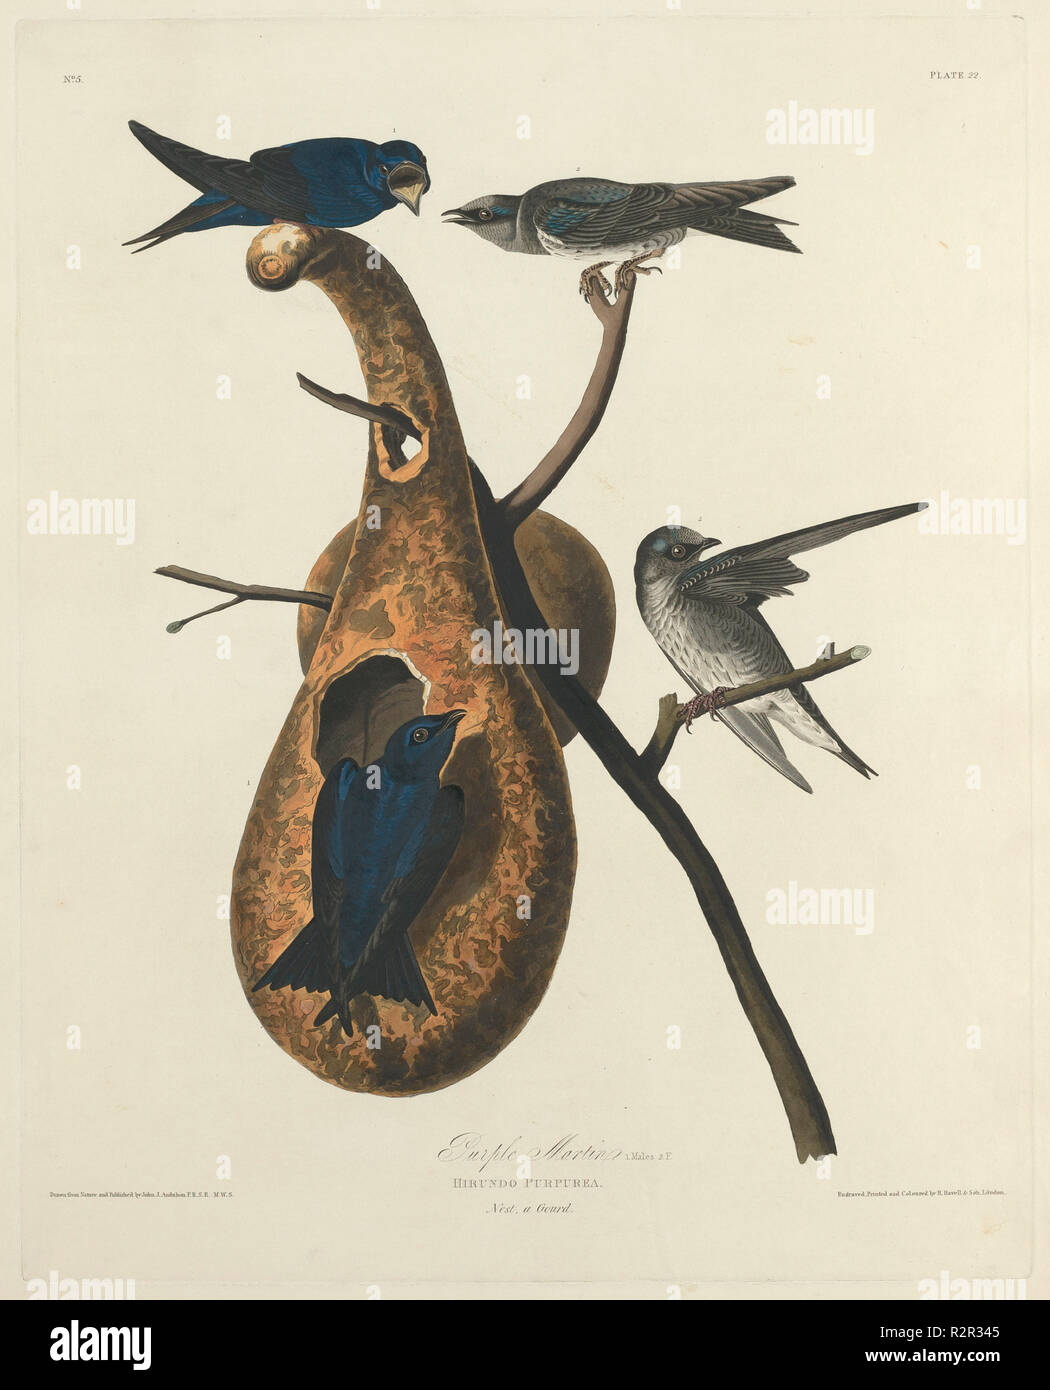 Purple Martin. Dated: 1827. Medium: hand-colored etching and aquatint on Whatman paper. Museum: National Gallery of Art, Washington DC. Author: Robert Havell after John James Audubon. Stock Photo